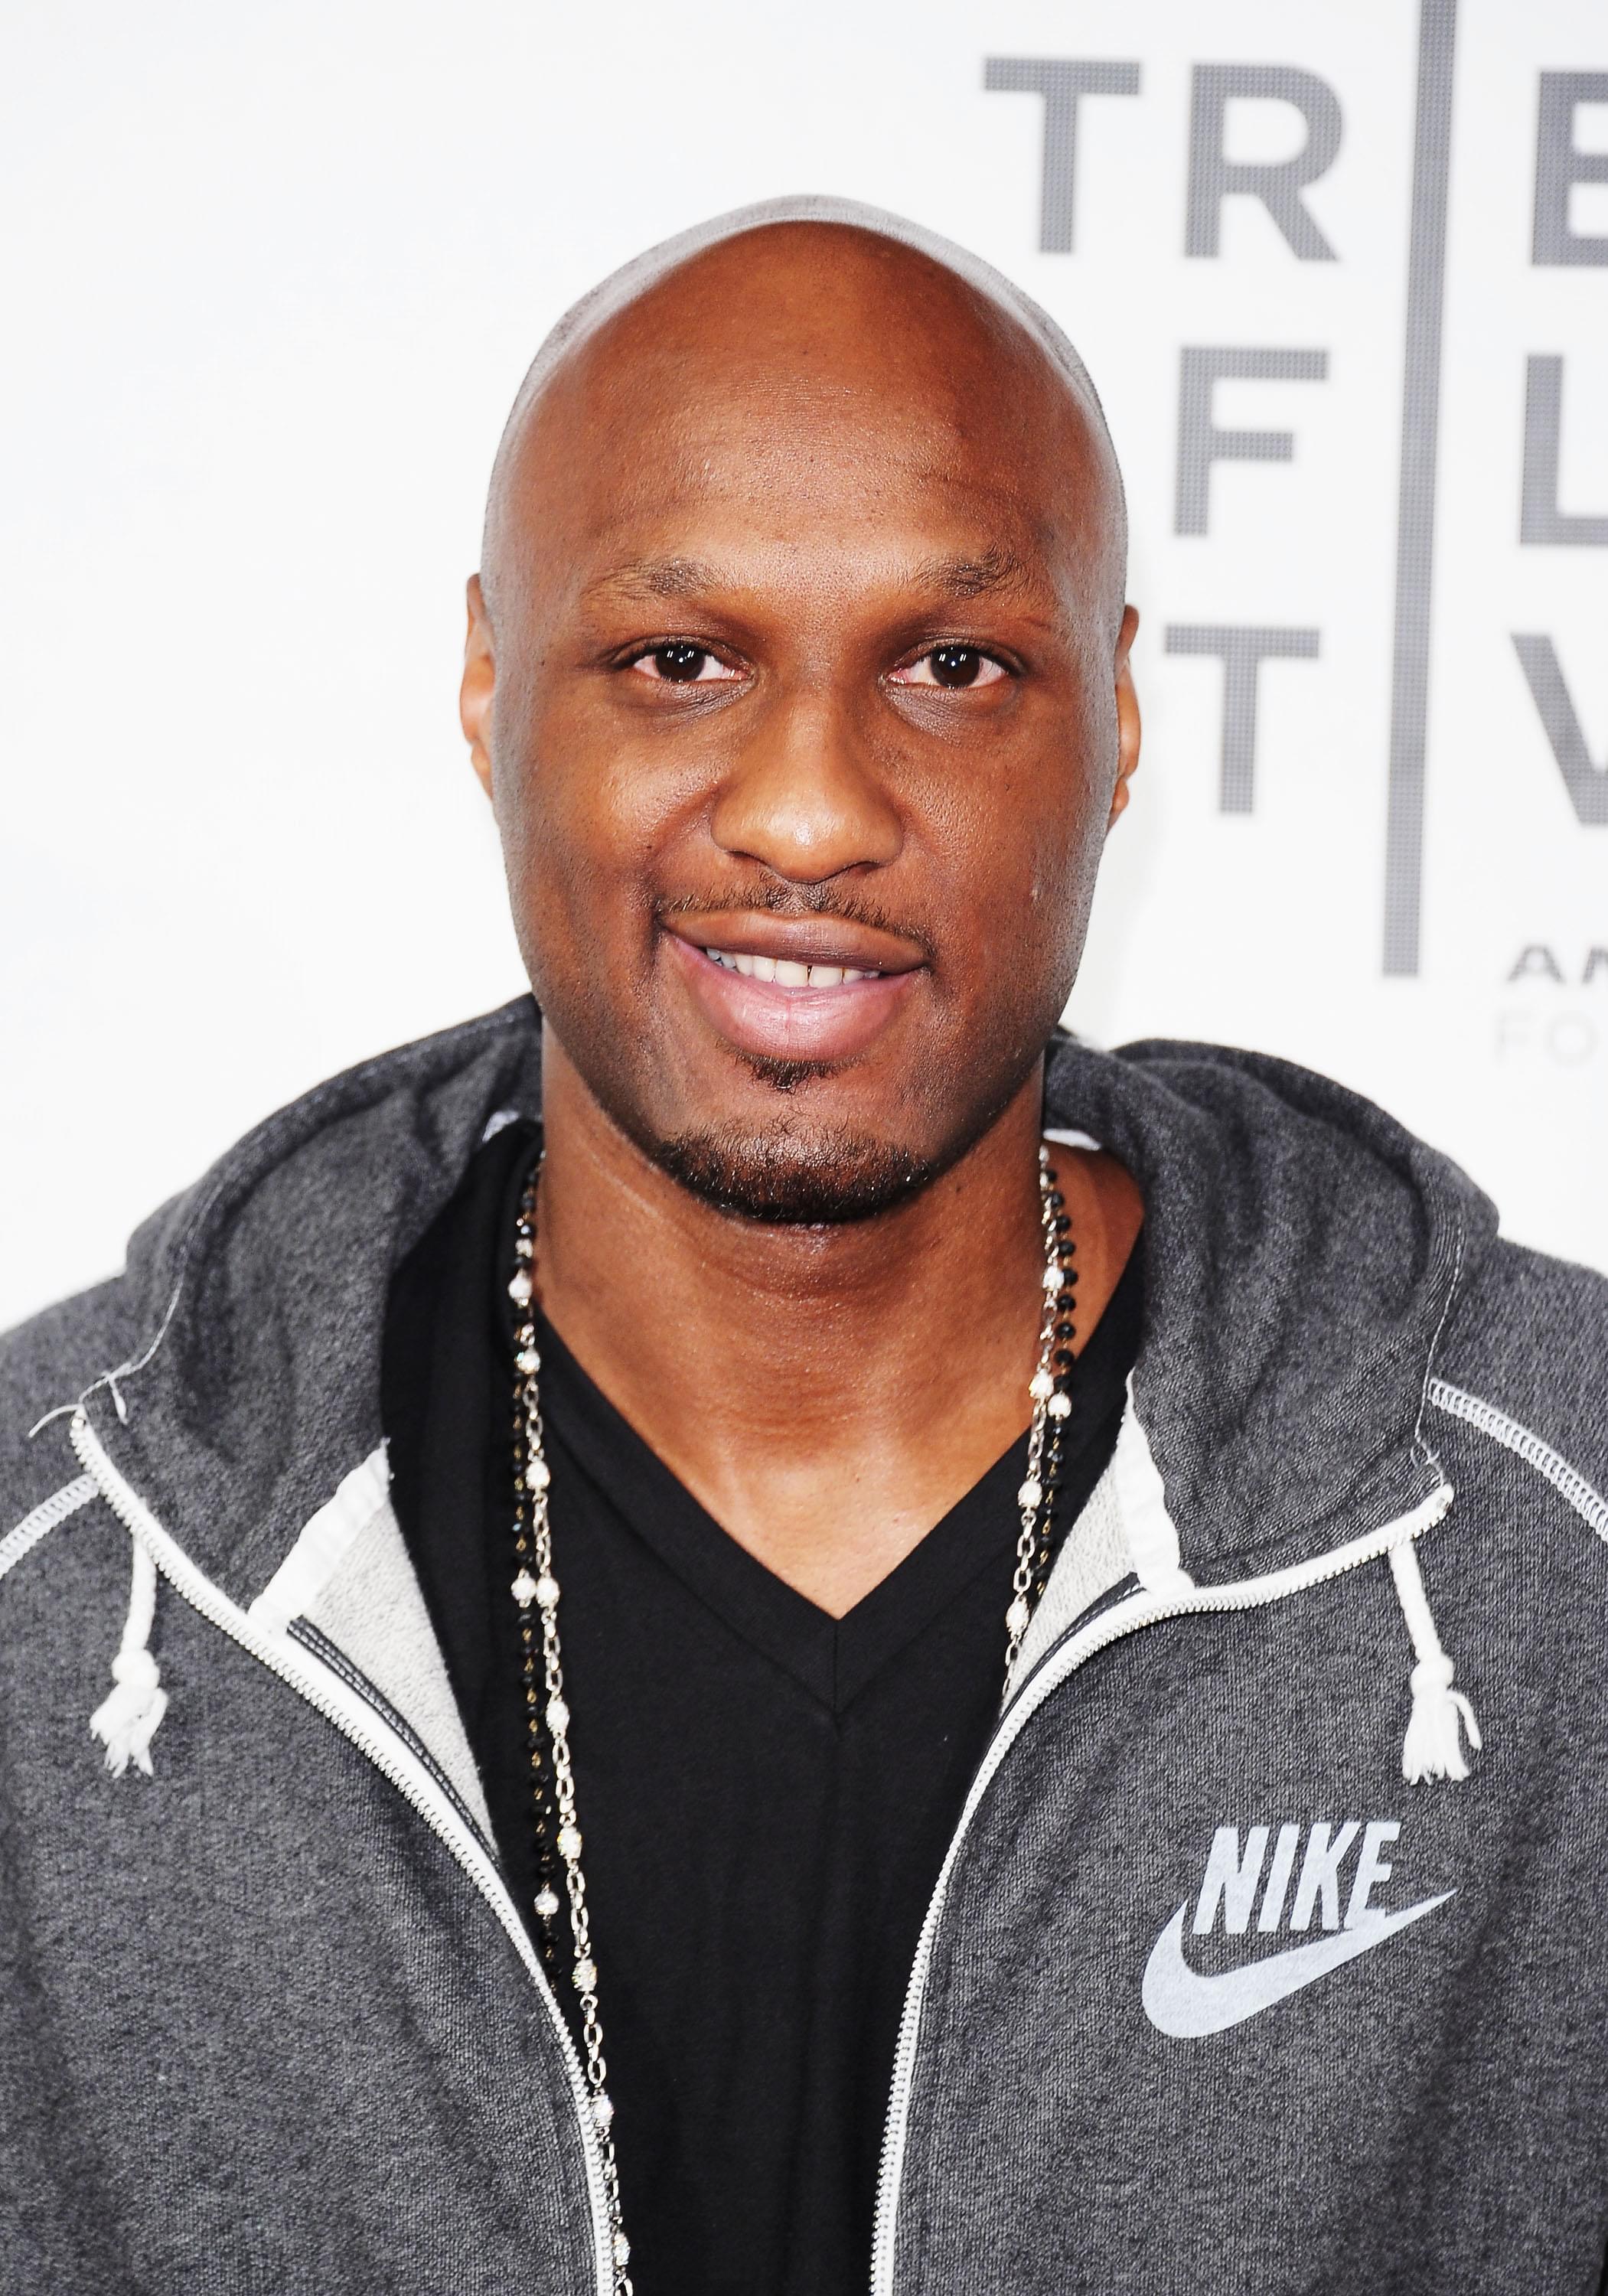 Lamar Odom Is On The Road To Recovery